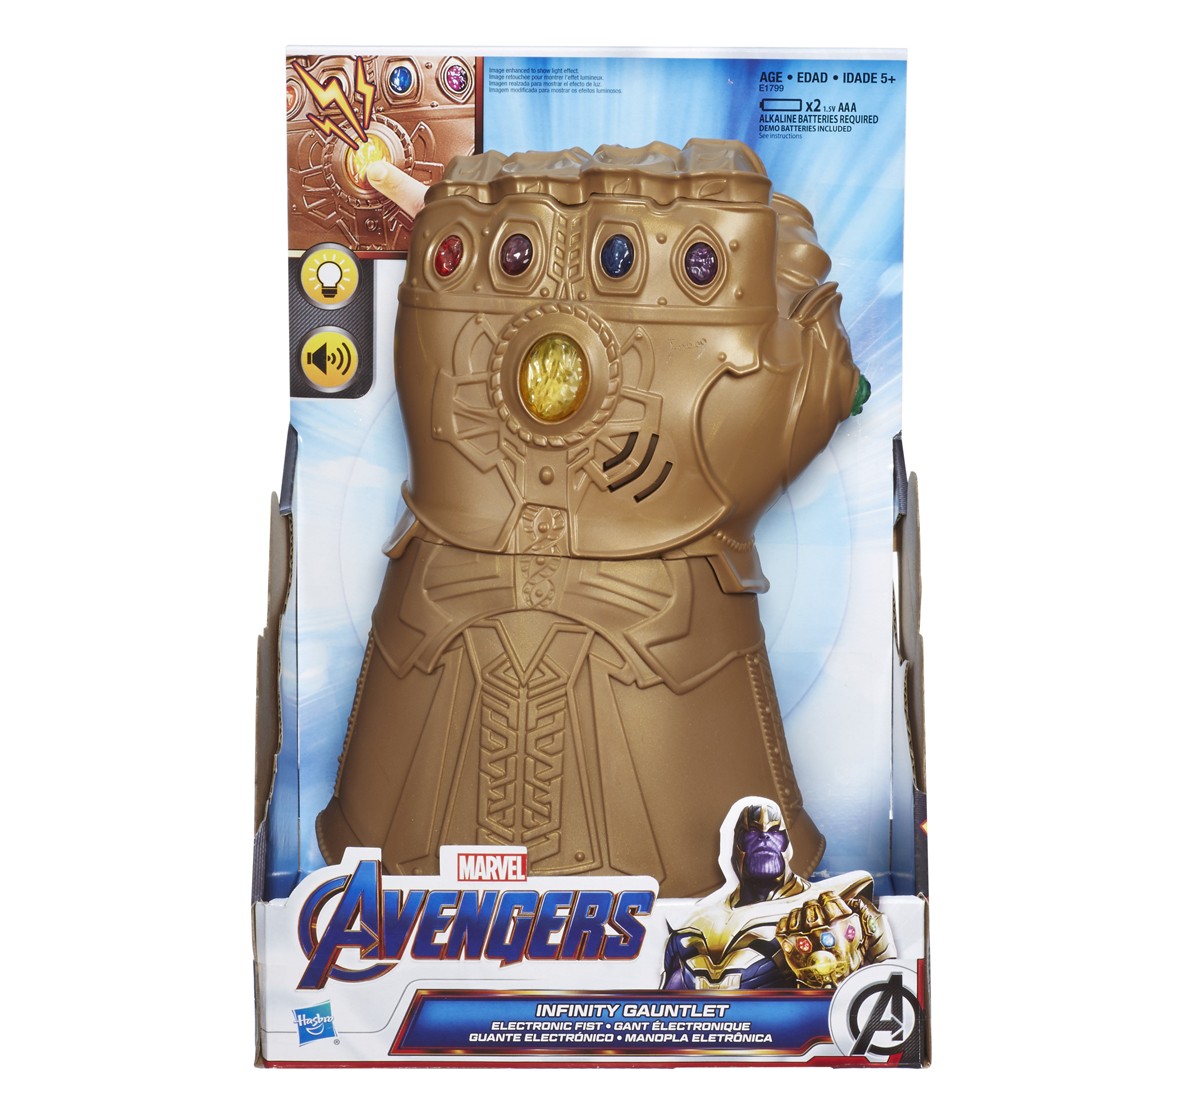 Marvel Avengers: Infinity War Infinity Gauntlet Electronic Fist Roleplay Toy With Lights & Sounds, 5Y+